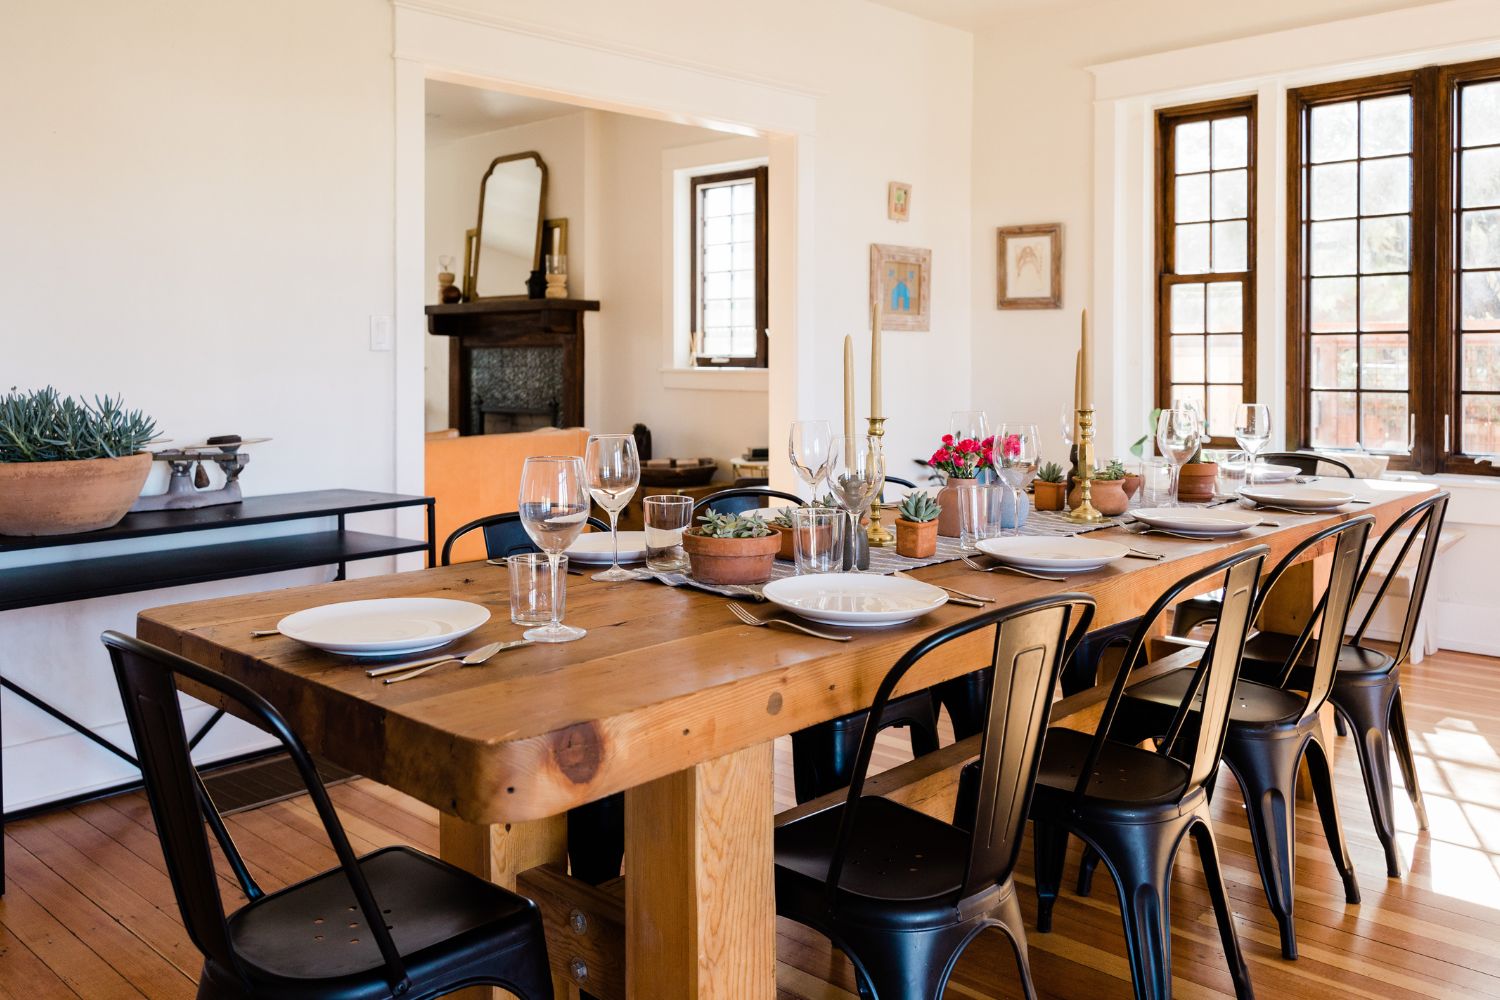 A guide to the best dining room table for your home